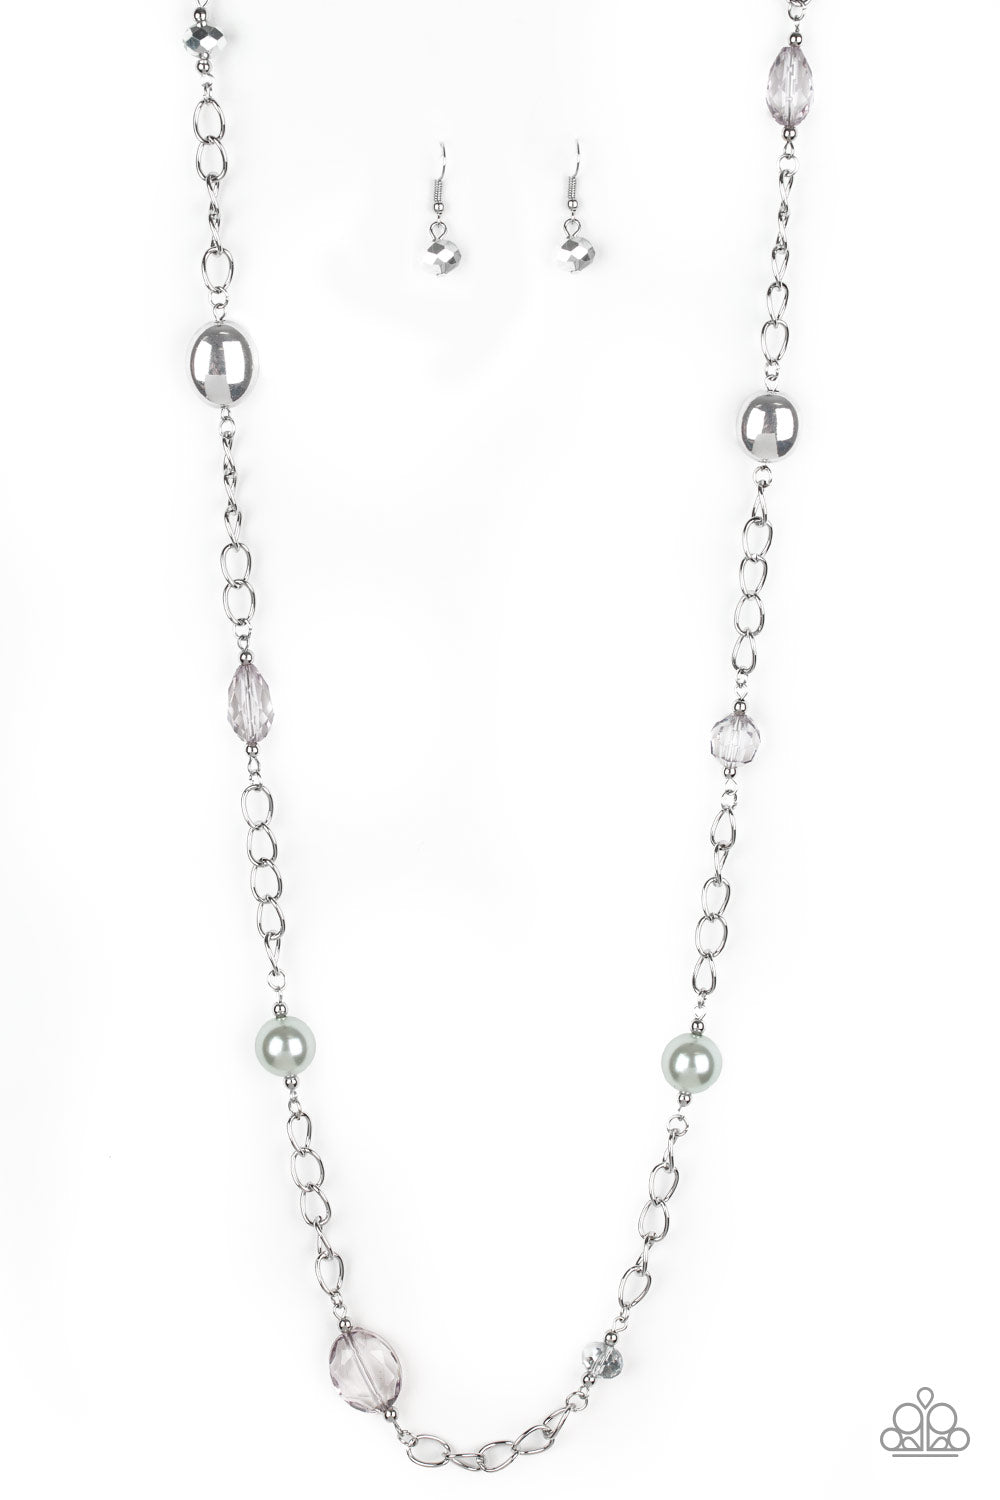 Only For Special Occasions - Silver Necklace Set